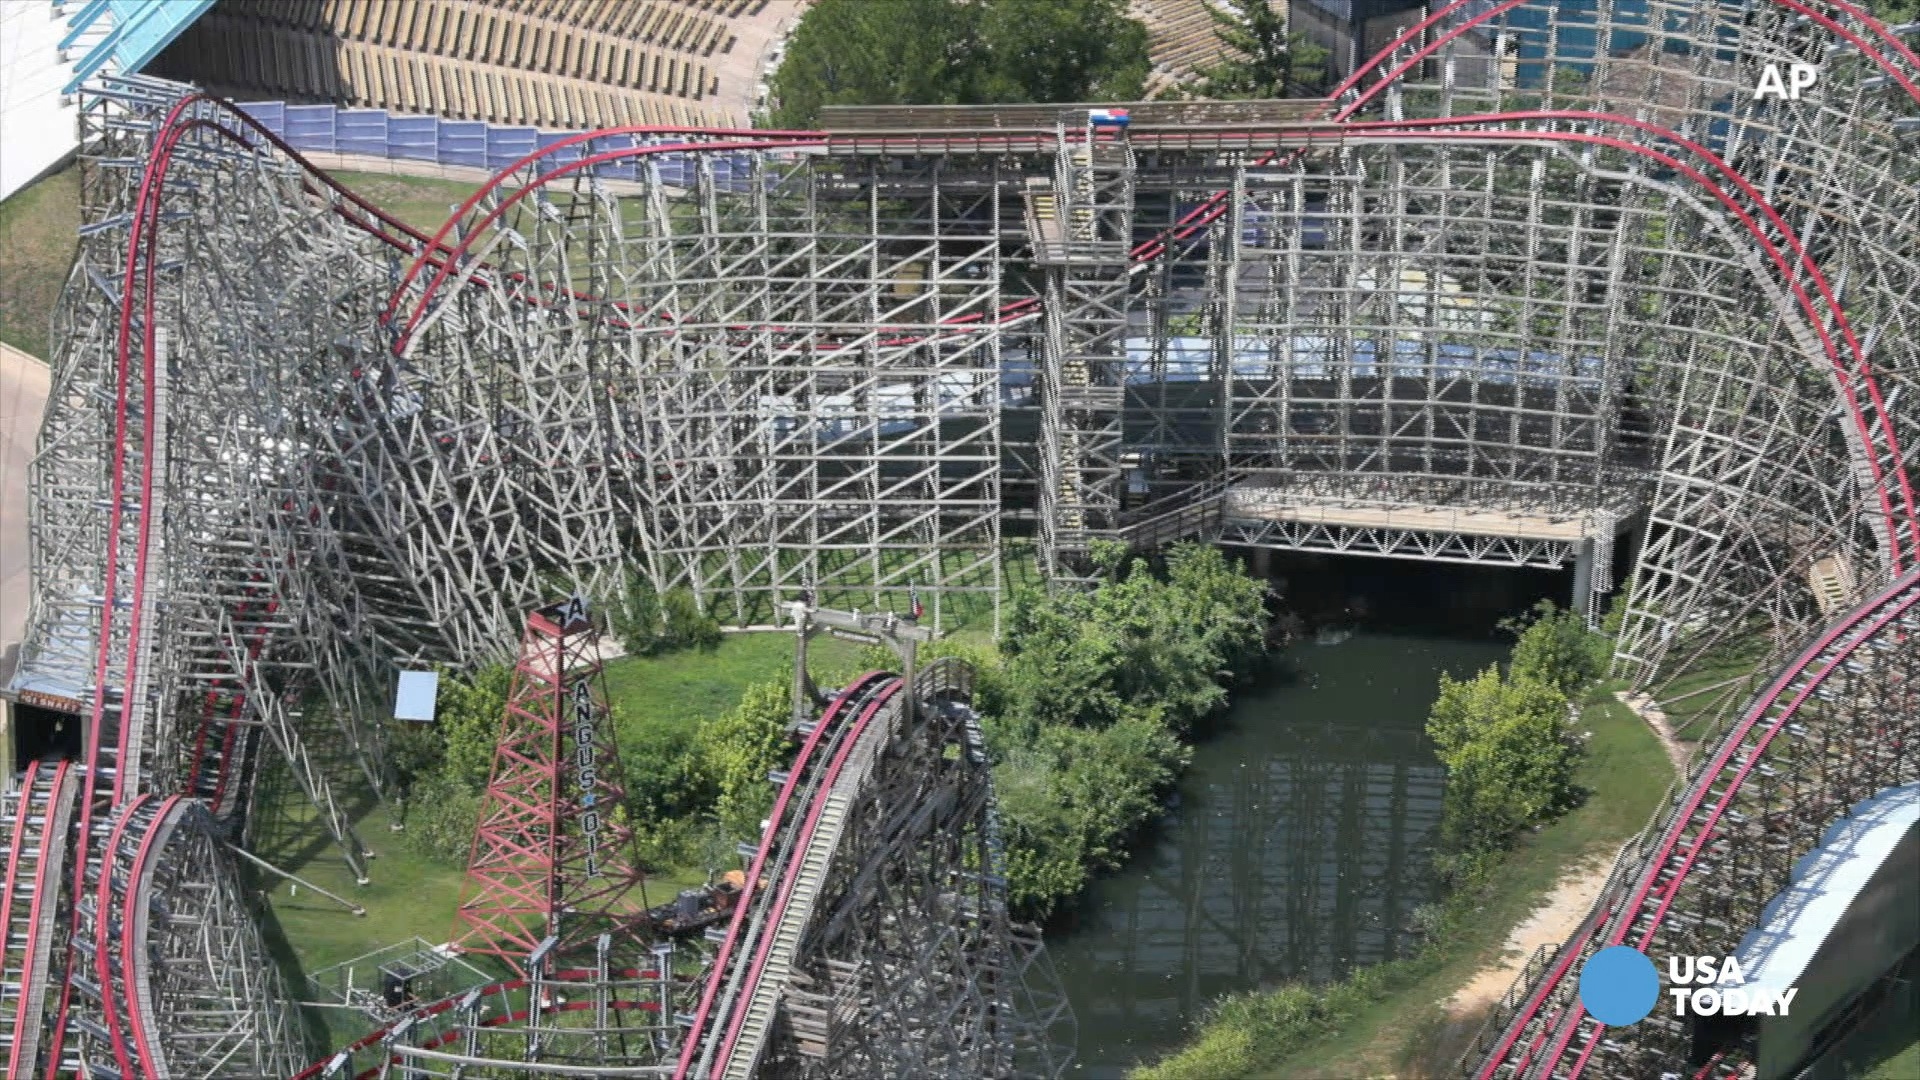 the-joker-six-flags-newest-coaster-succumbs-to-technical-problems